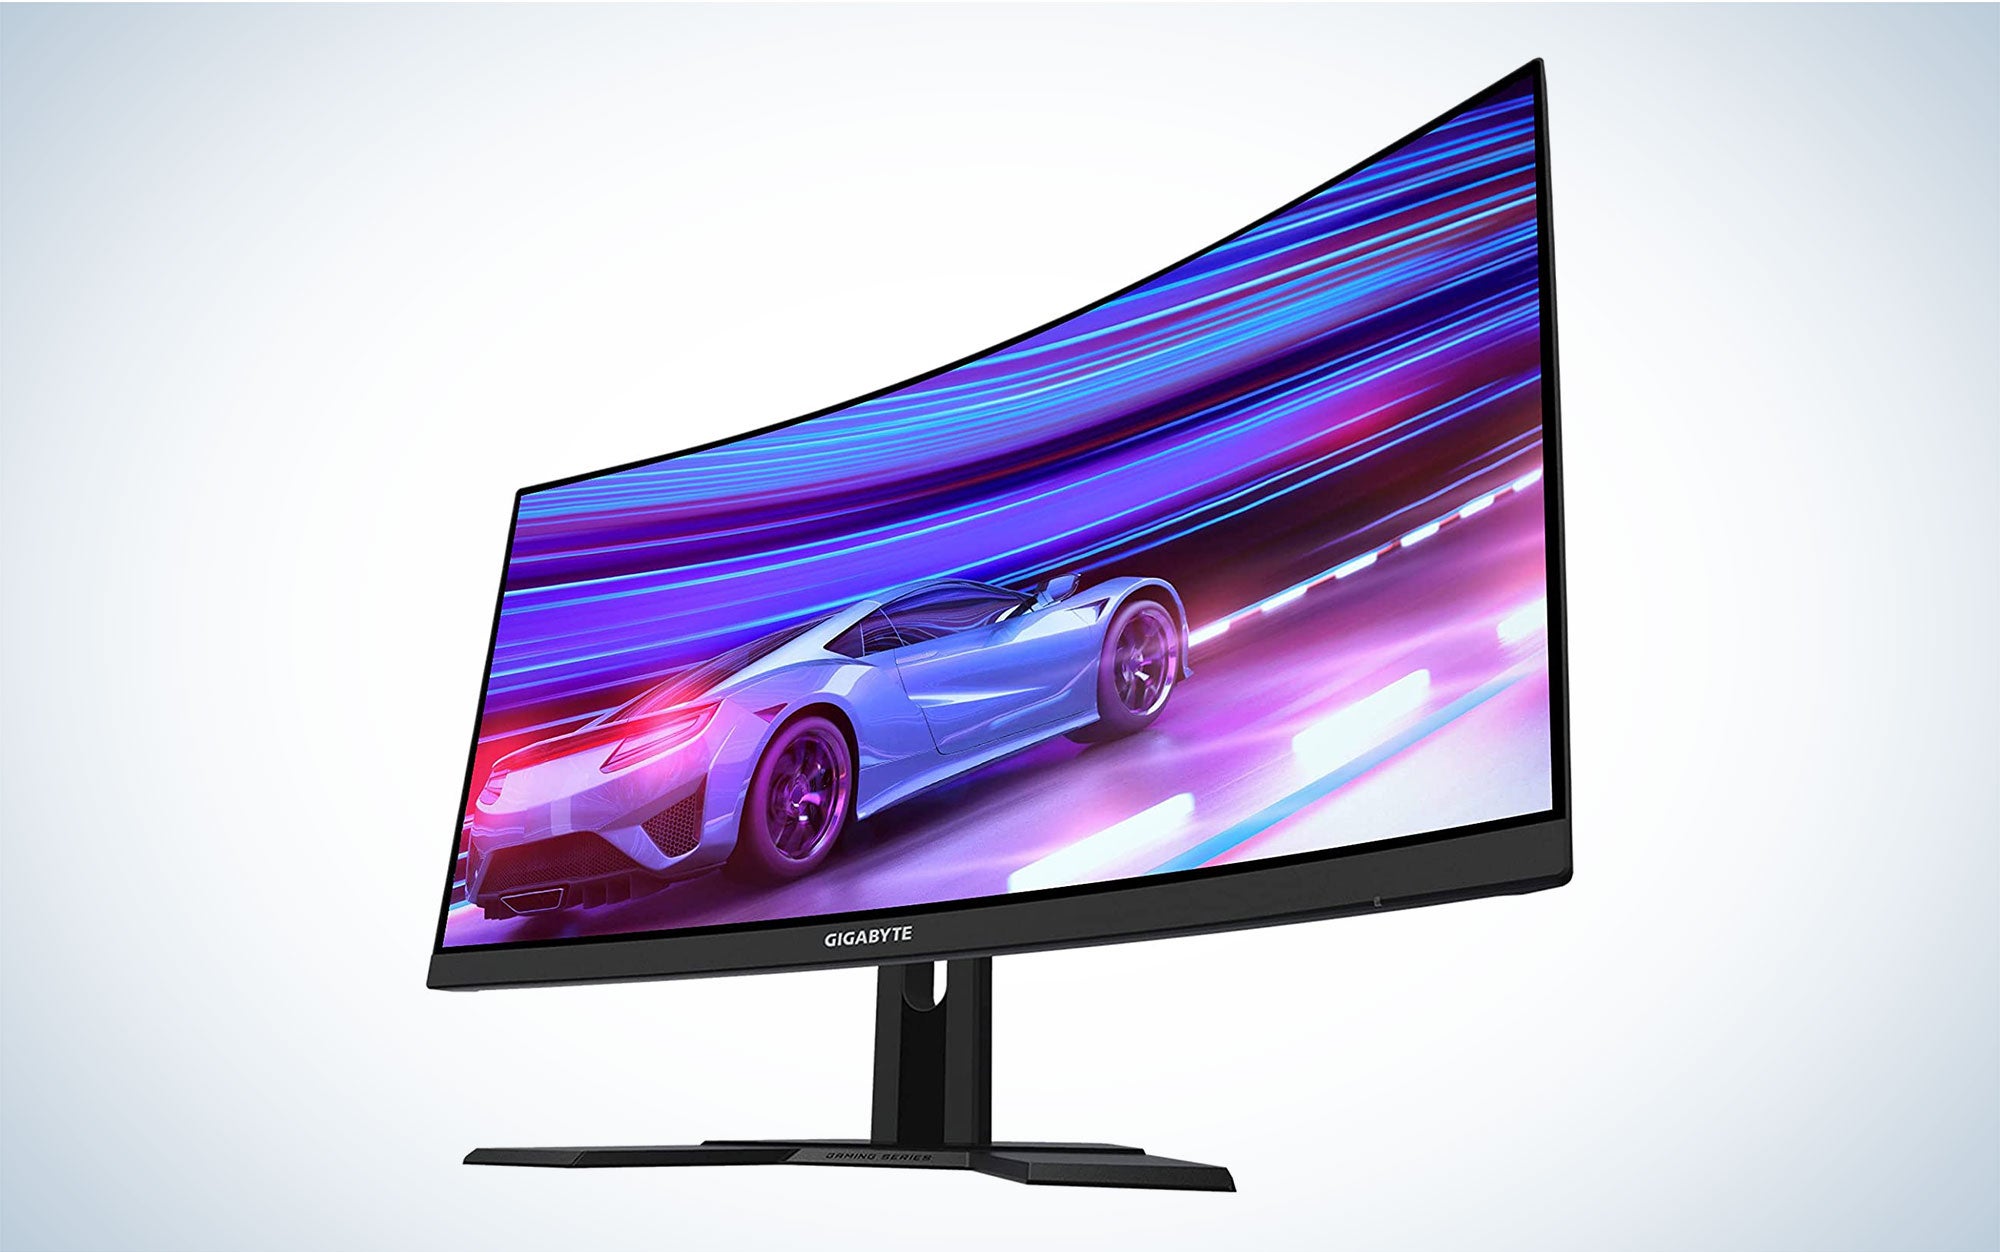 Gigabyte G27QC is the best cheap gaming monitor.